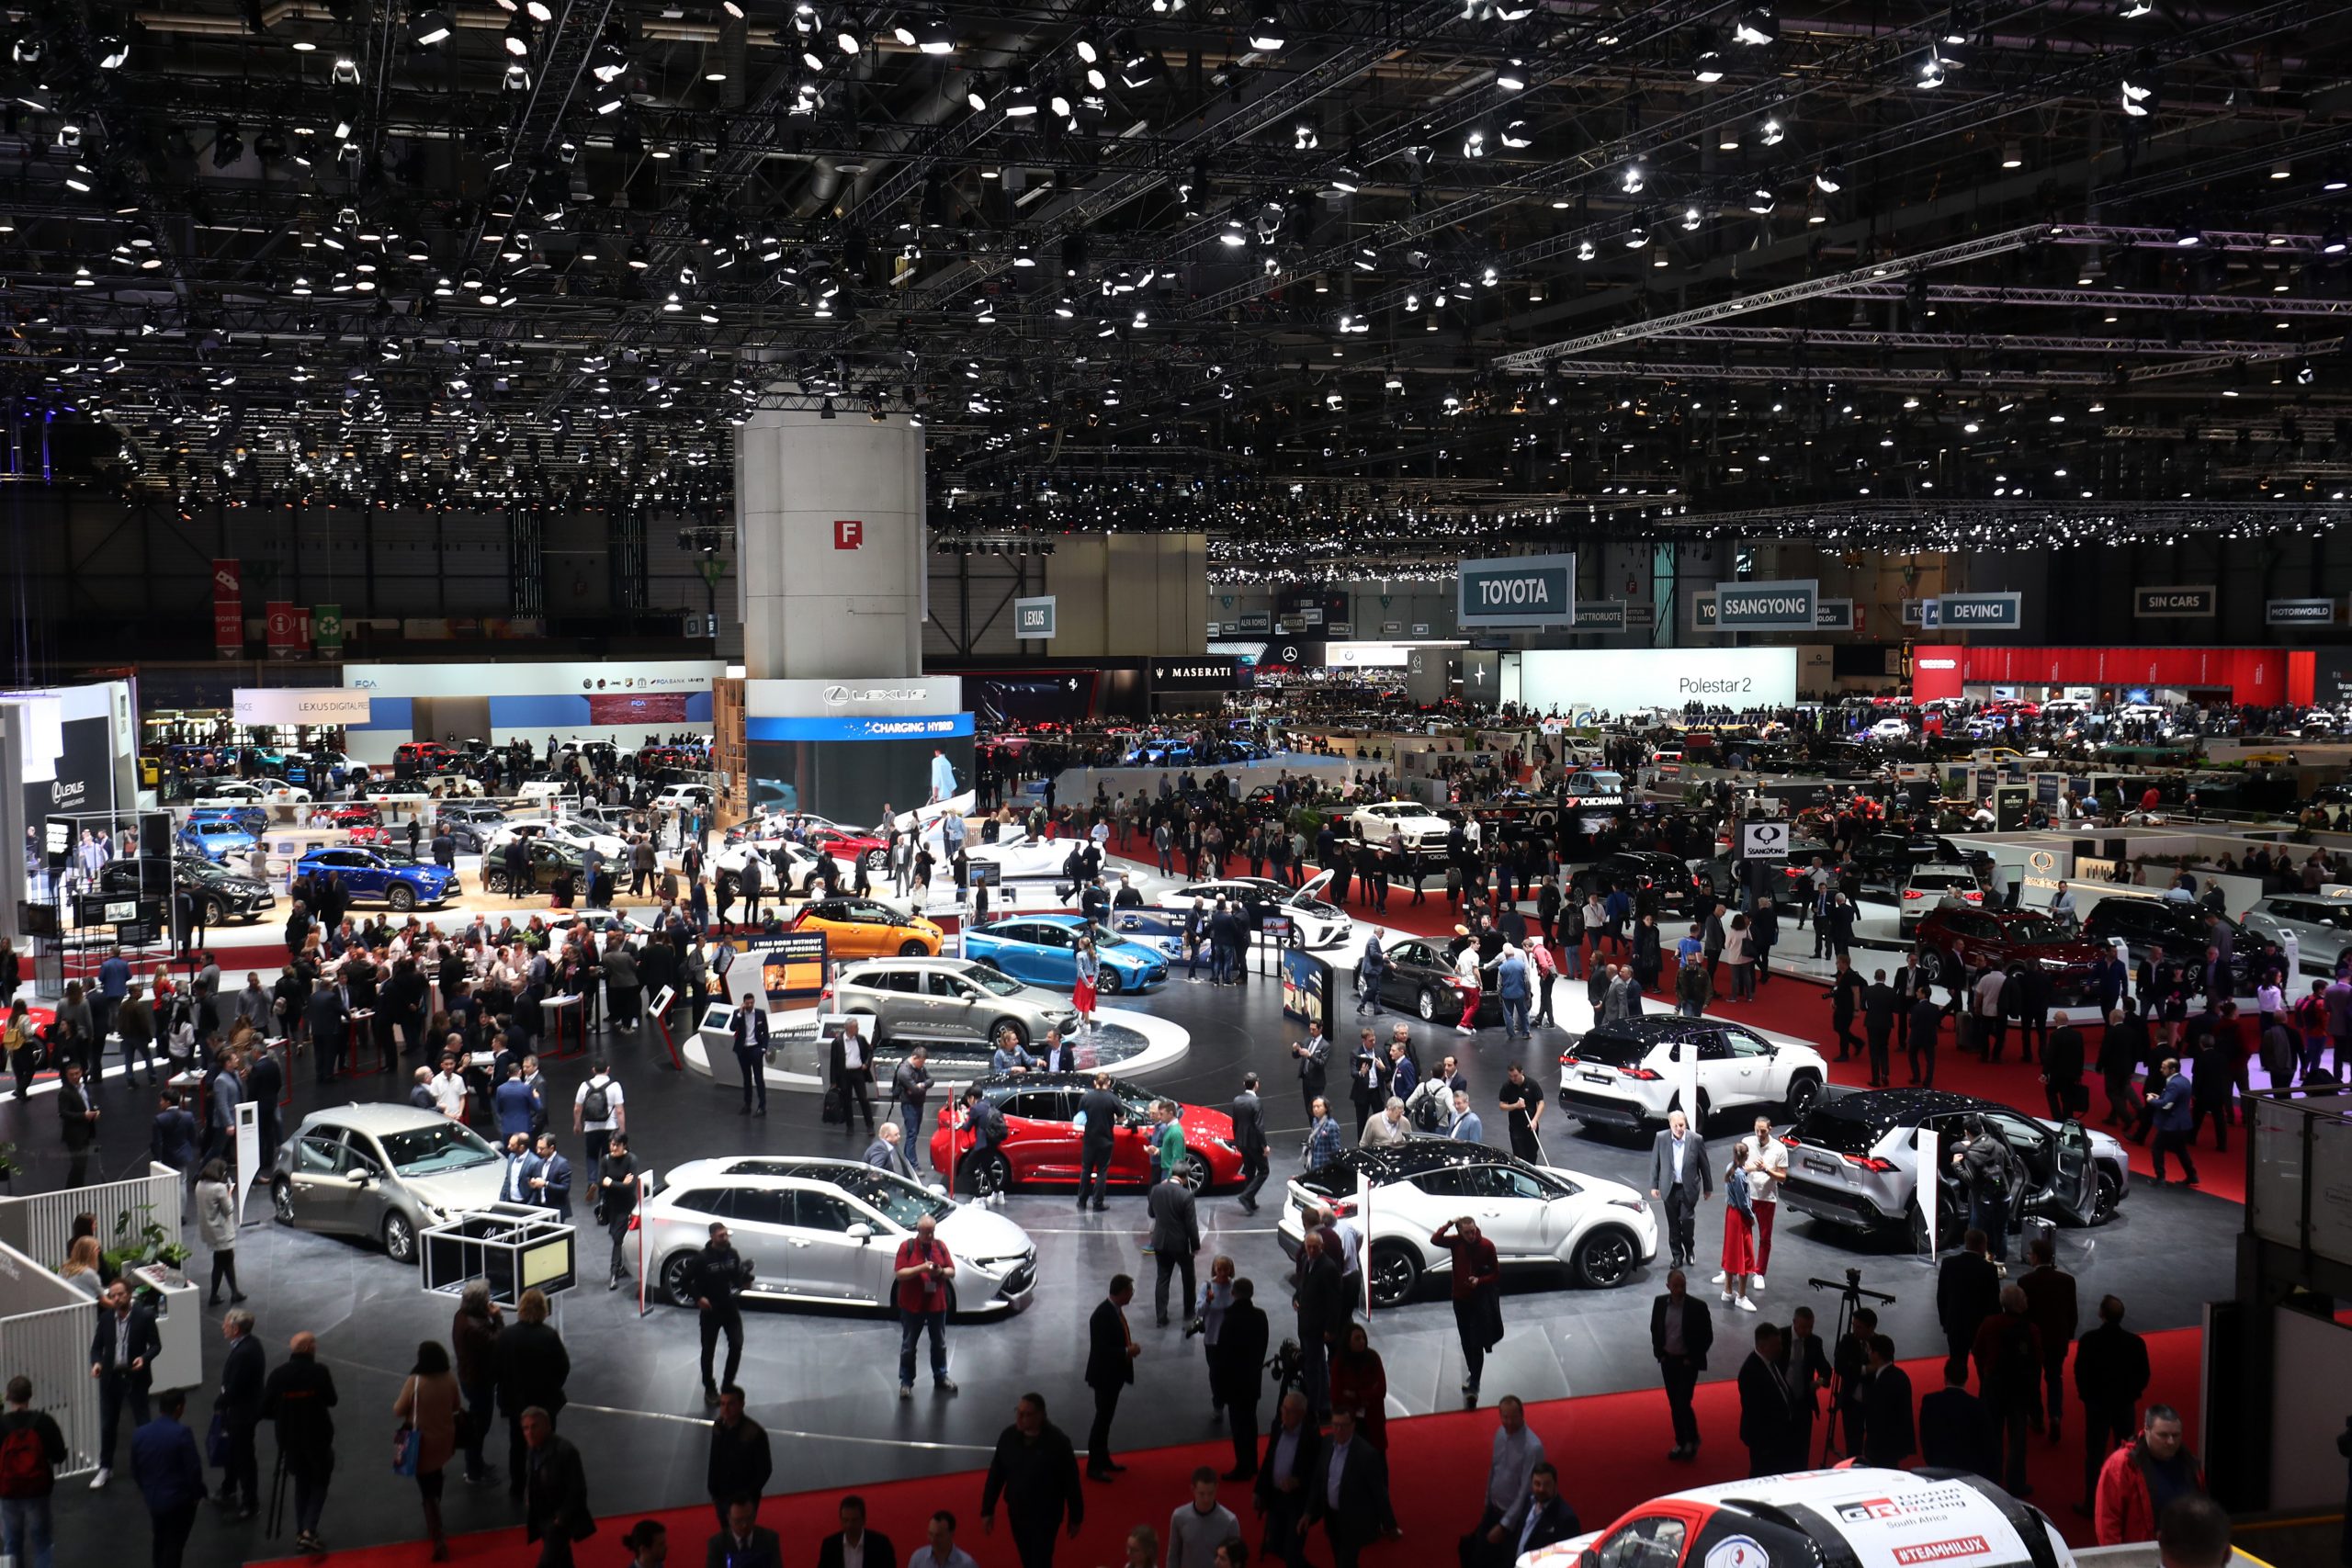 Geneva International Motor Show set to return in 2022 after two years